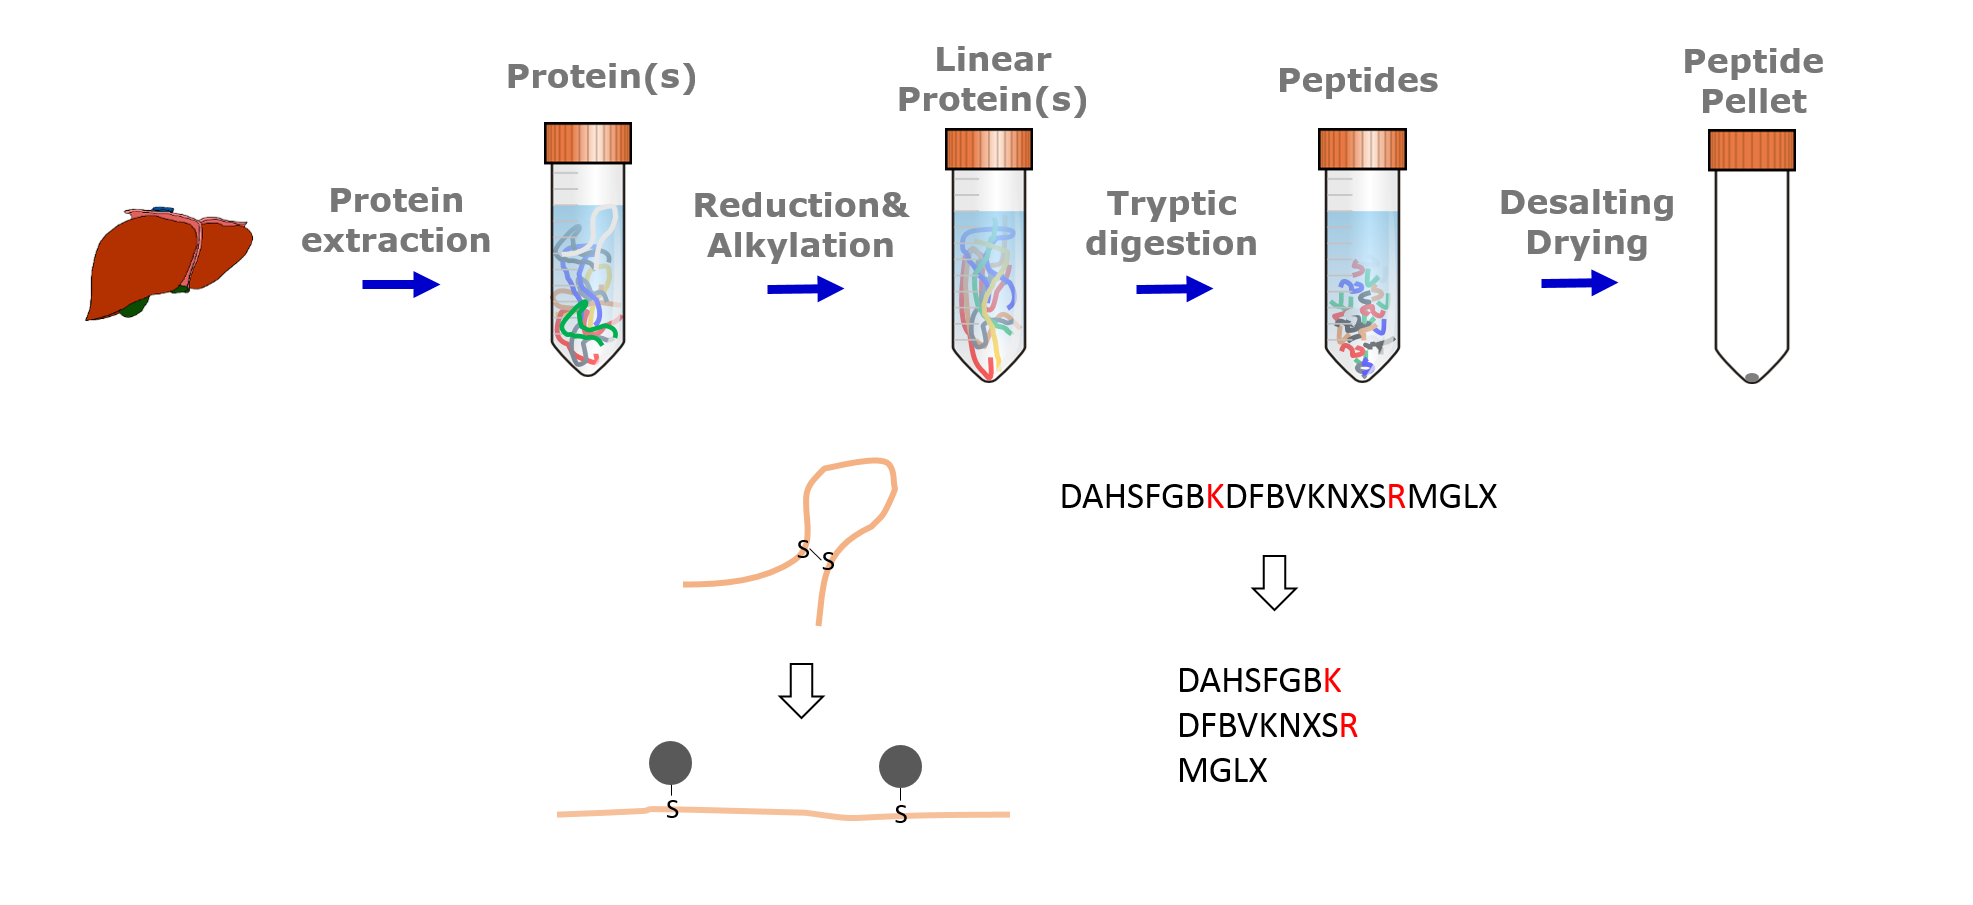 liver followed by protein extraction, reduction and alkylation, tryptic digestion, and deslating drying to produce a peptide pellet. Below is a schematic of protein crosslinking with S-S binding.